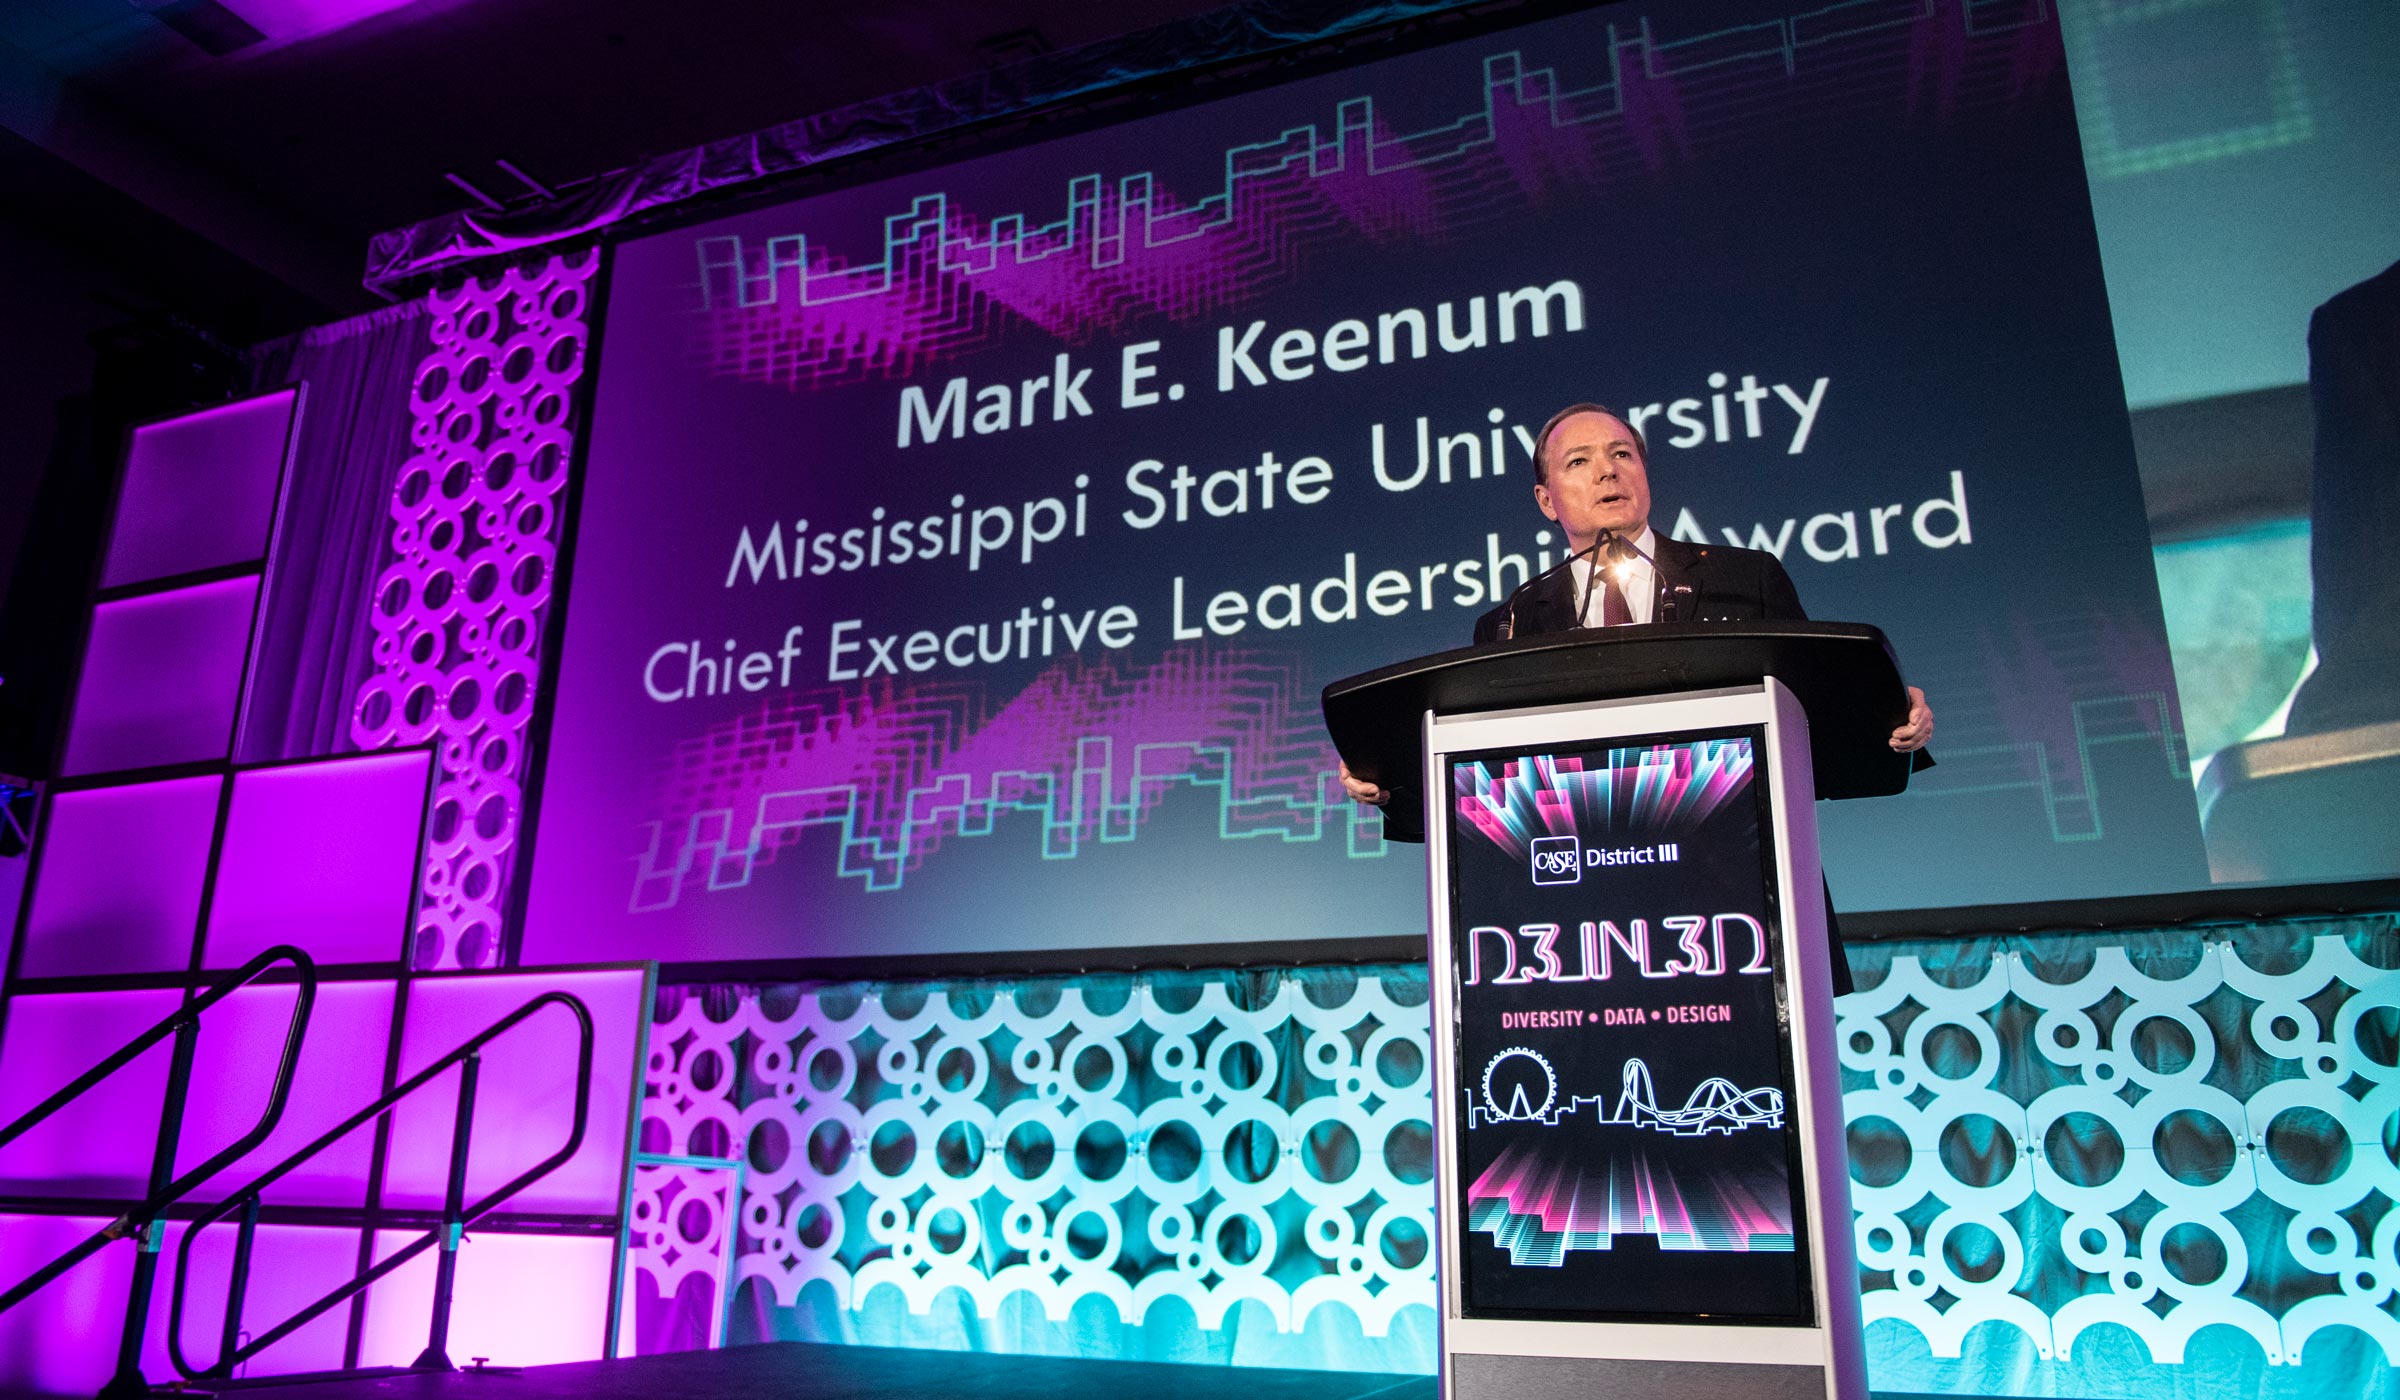 Dr. Keenum gives a speech after being announced the recipient of the Chief Executive Leadership Award in Orlando, Florida.